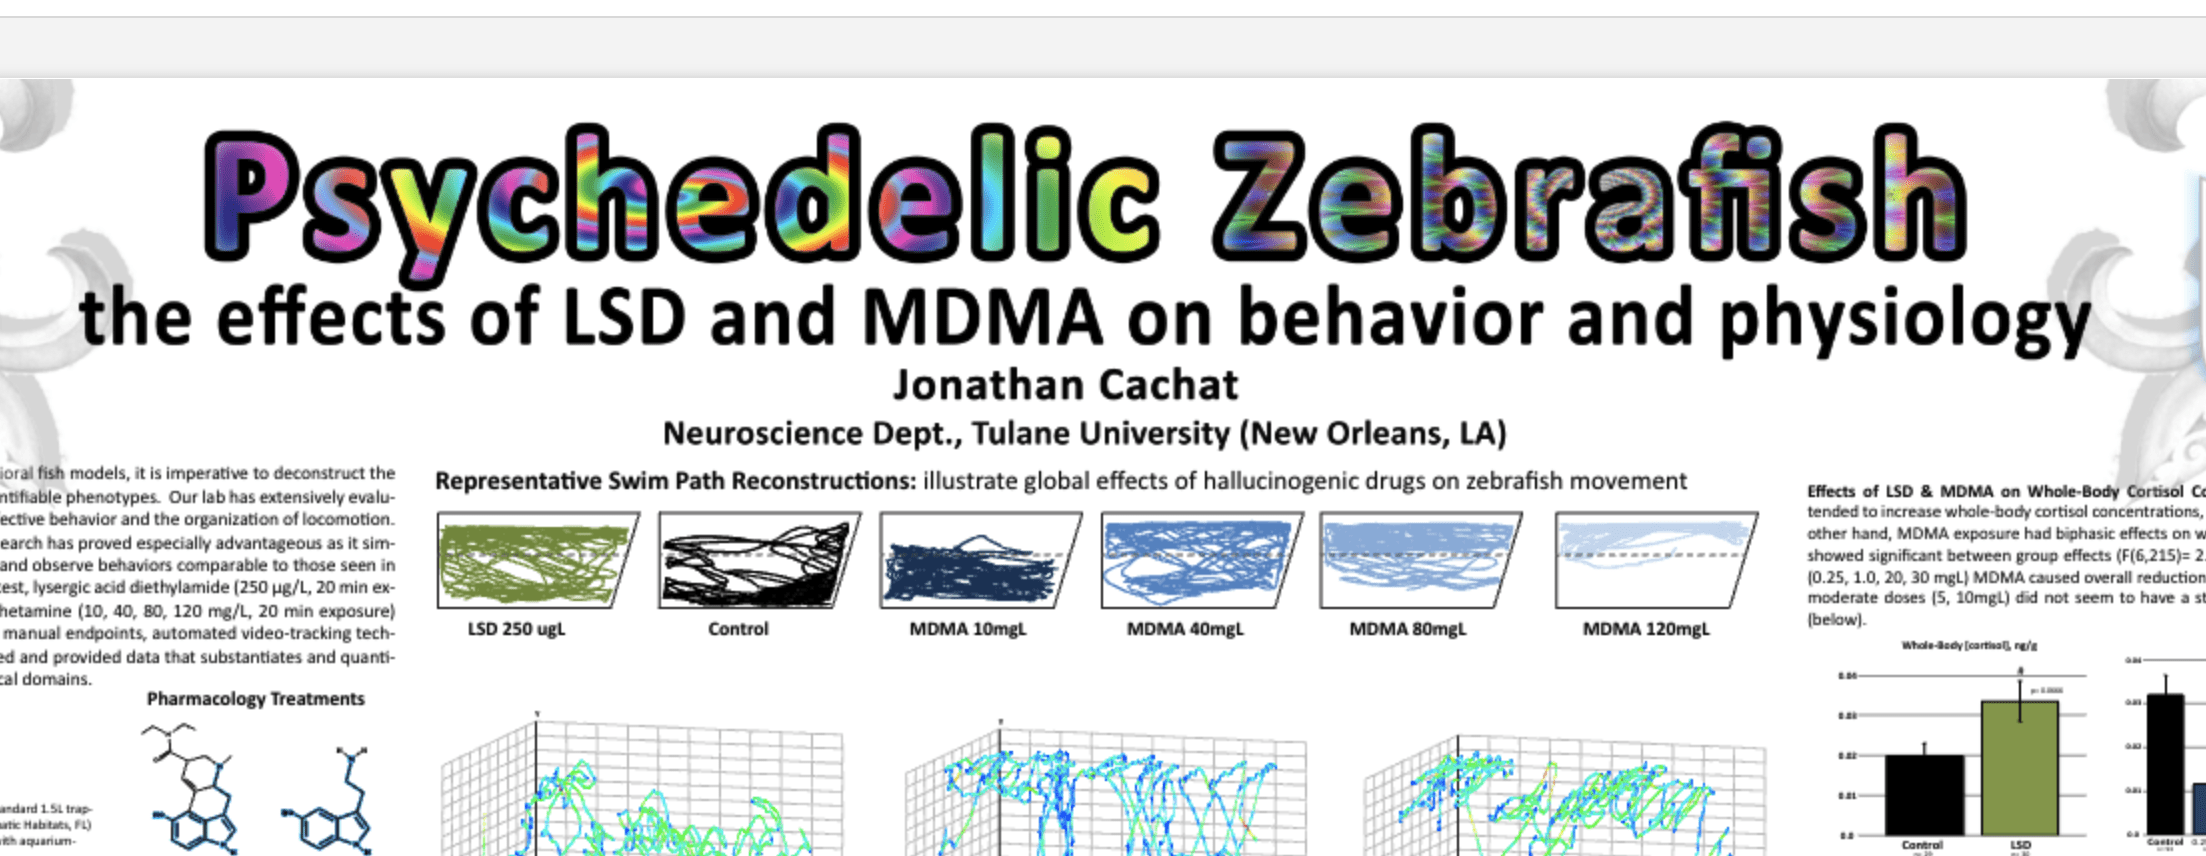 Psychedelic Zebrafish: the effects of LSD and MDMA on zebrafish behavior and physiology